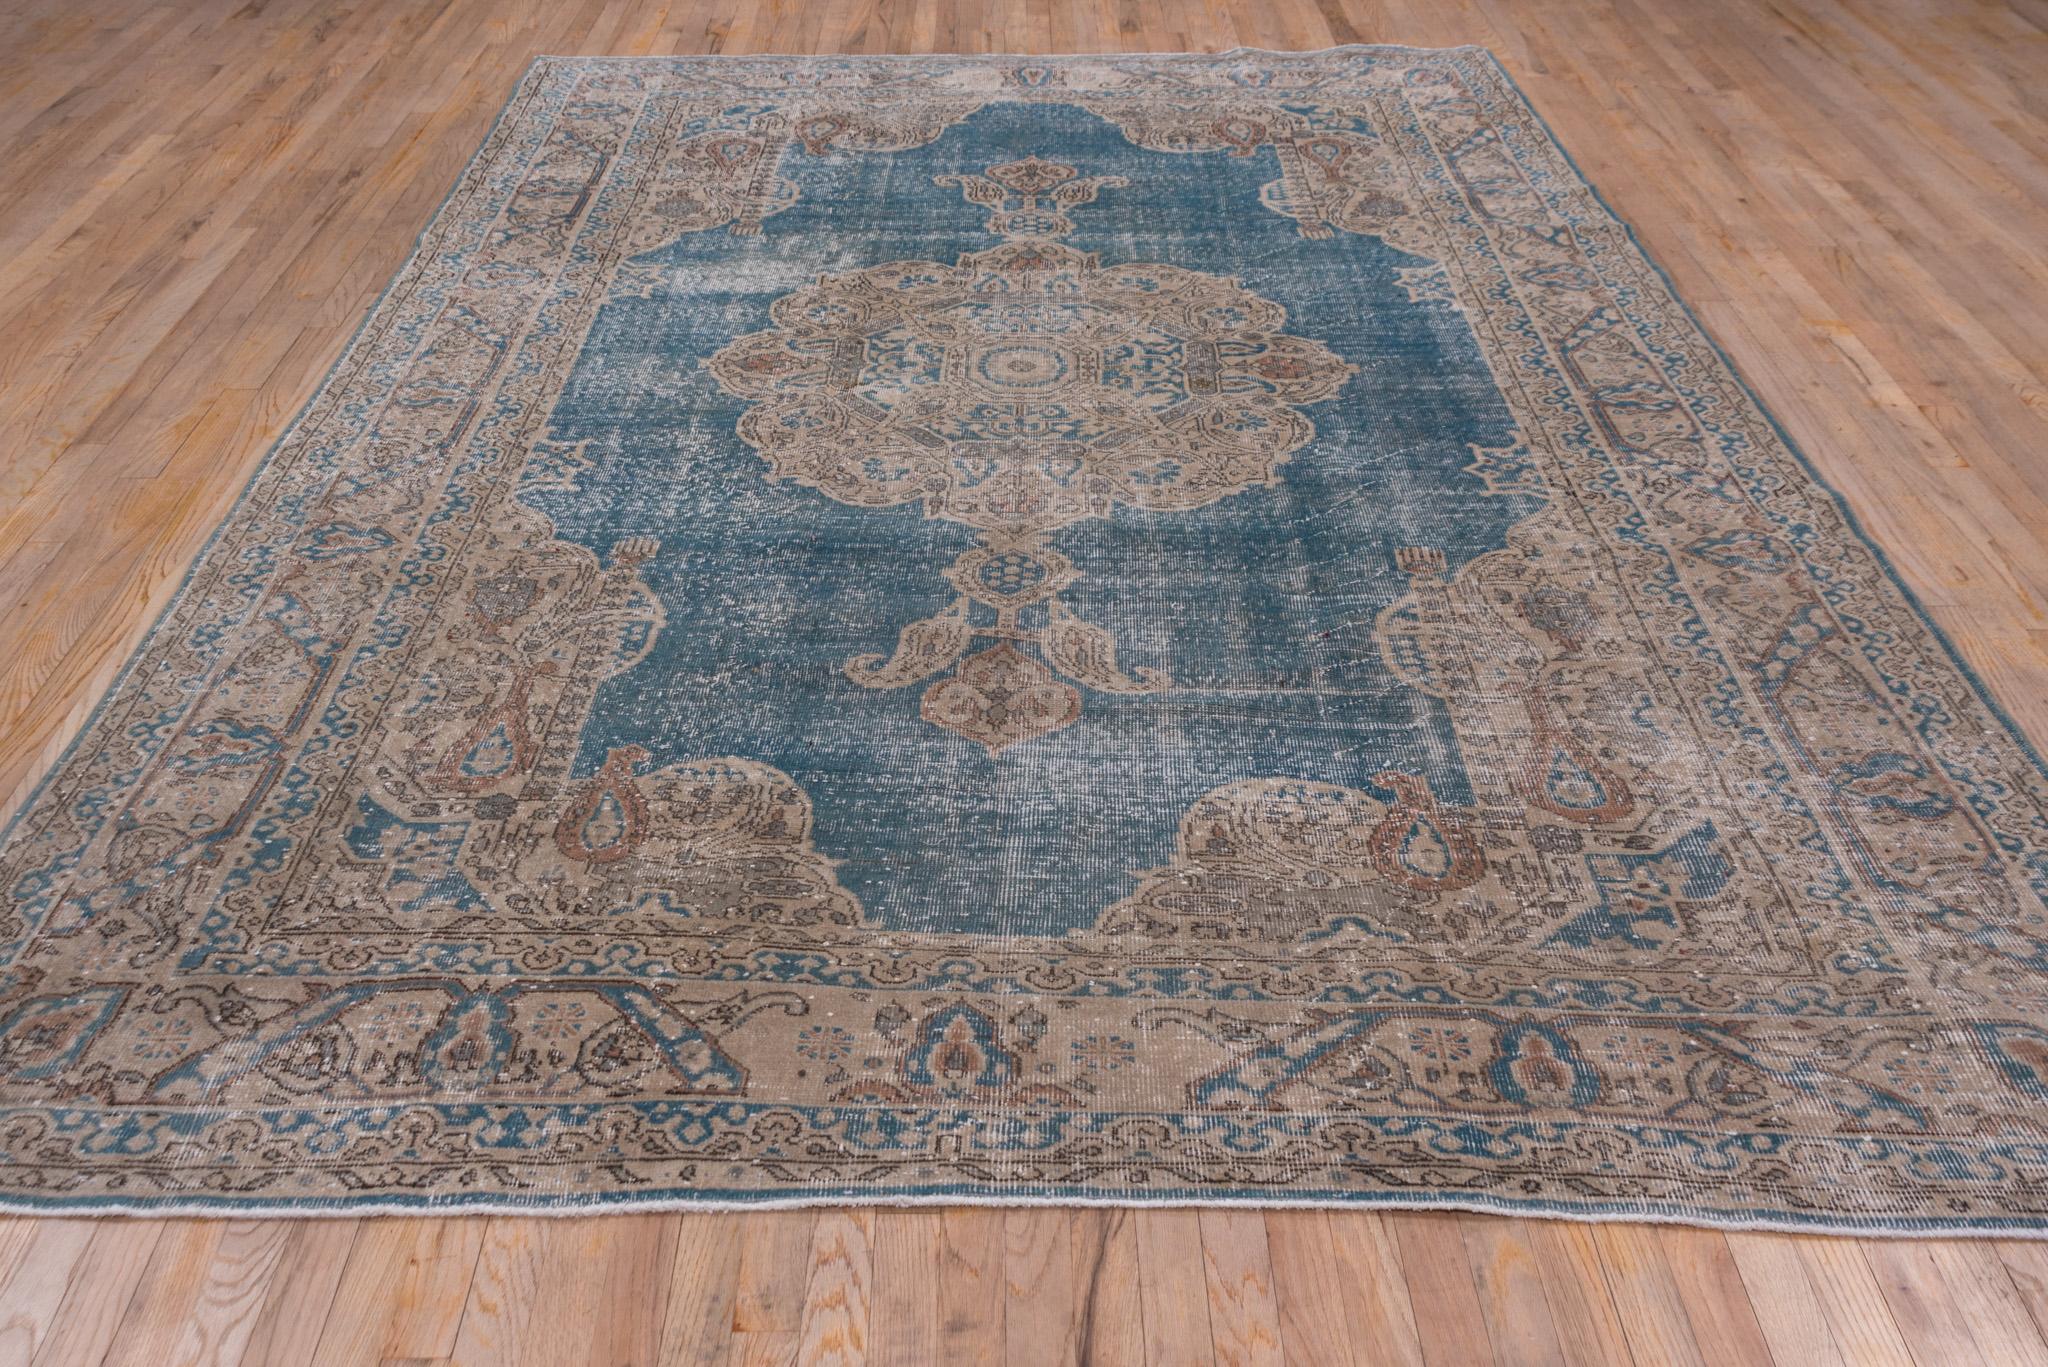 An Oushak Rug circa 1940. Hand knotted, made of 100% wool yarn.